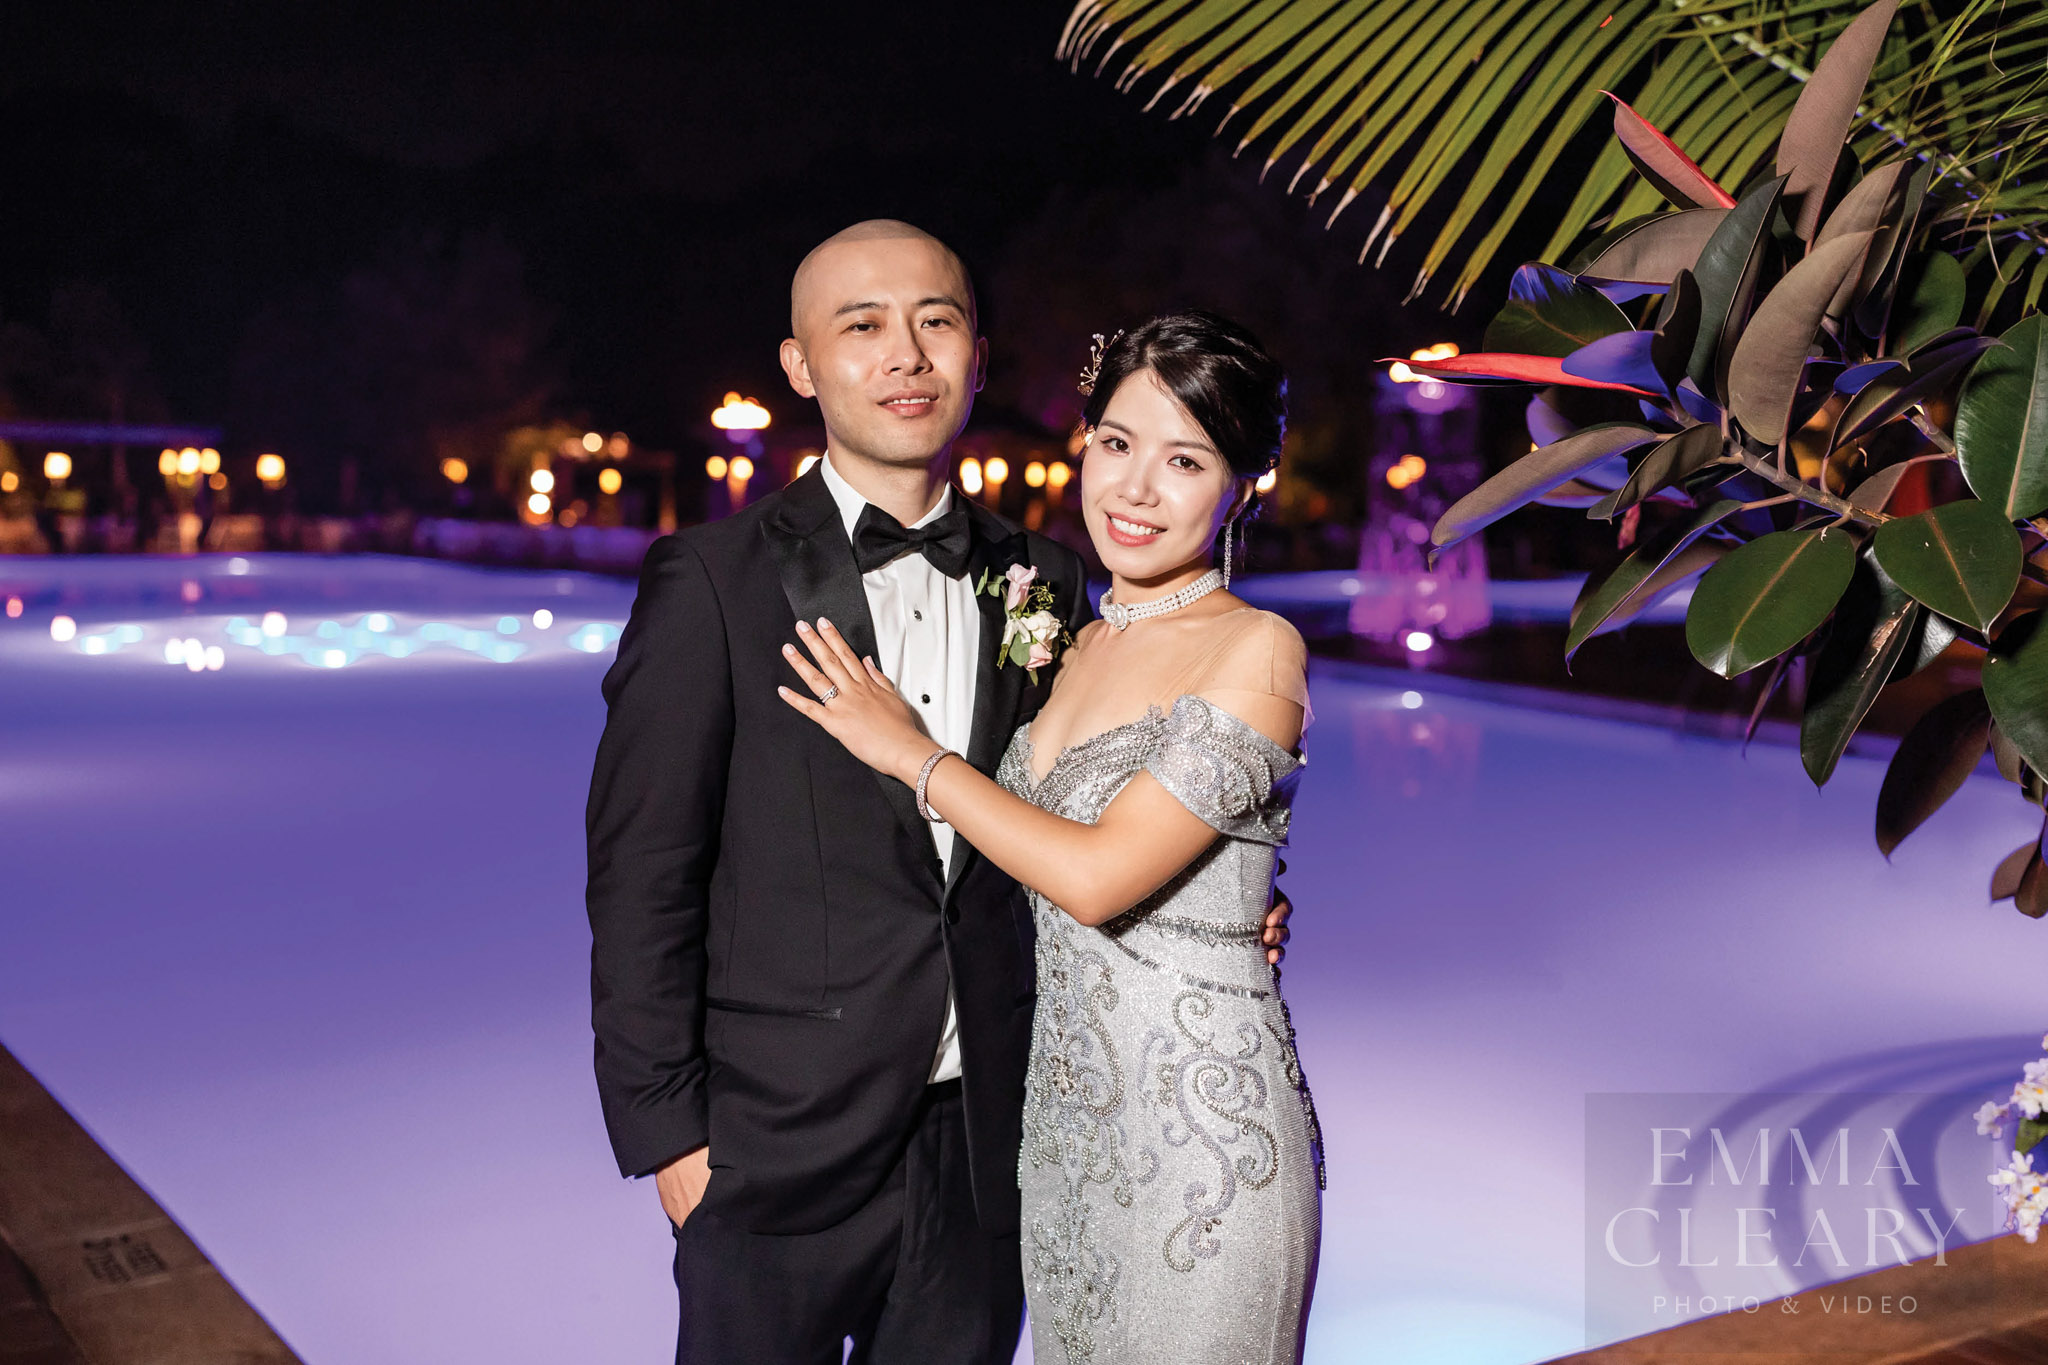 Wedding portrait of a couple at night